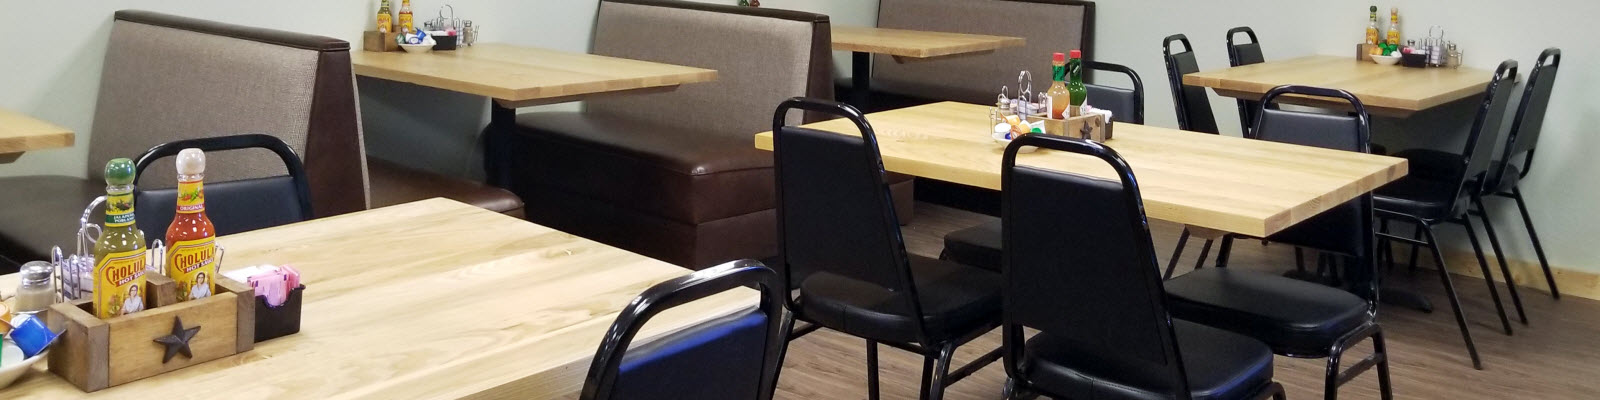 How to Clean Your Restaurant Booths - East Coast Chair and Barstool